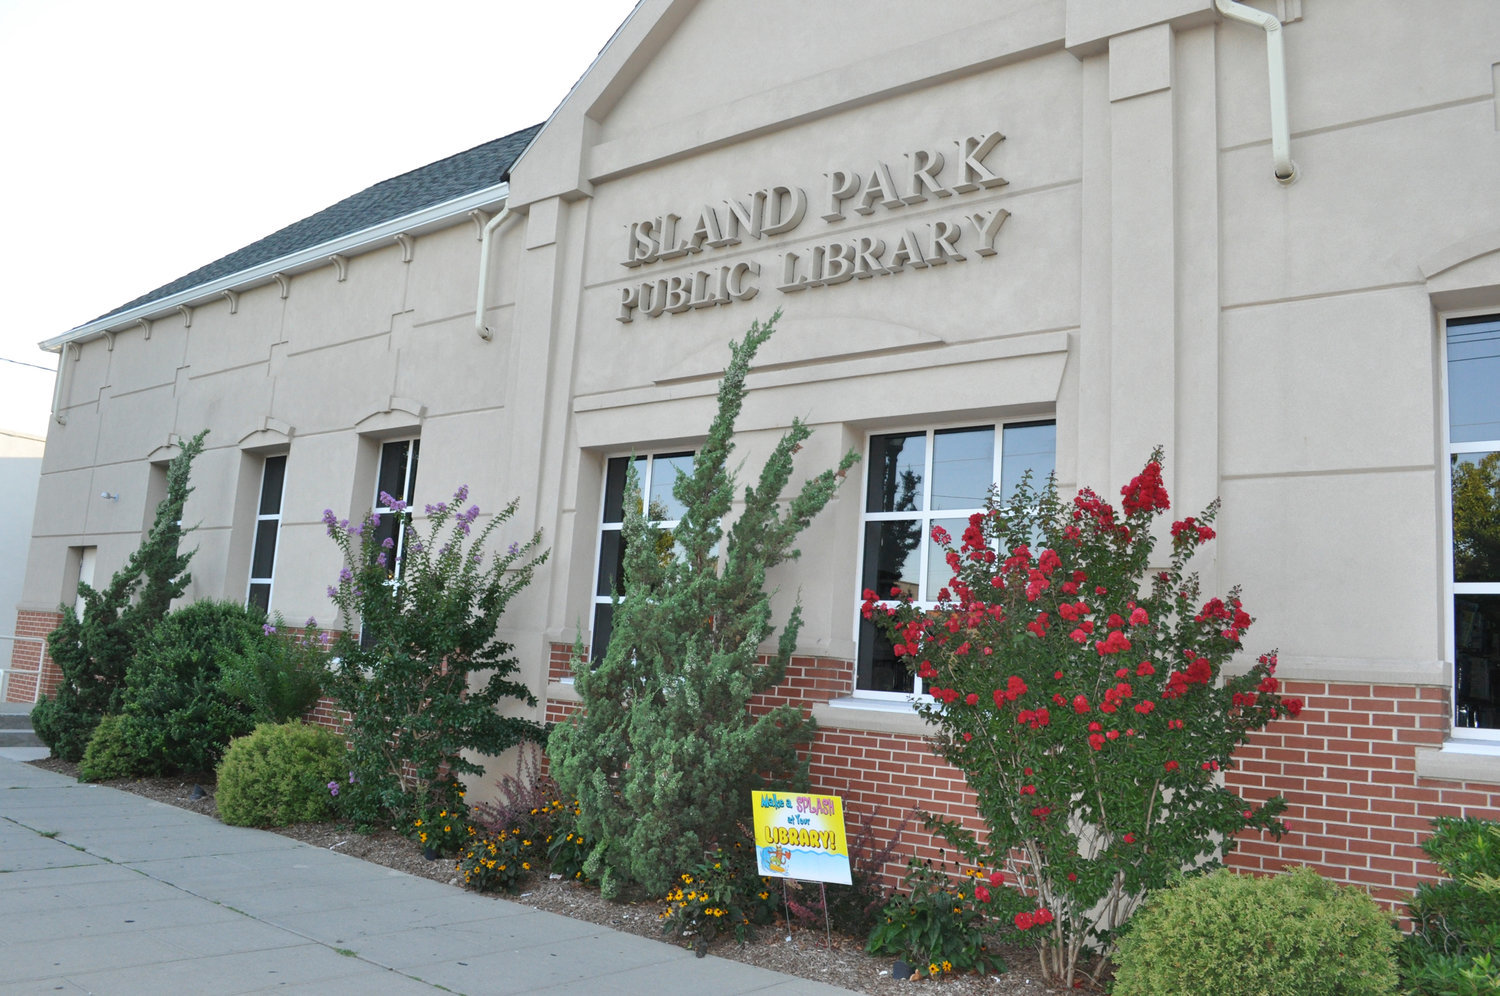 The Island Park Public Library will be getting two new air conditioning units thanks to a grant secured by Sen. Todd Kaminsky.